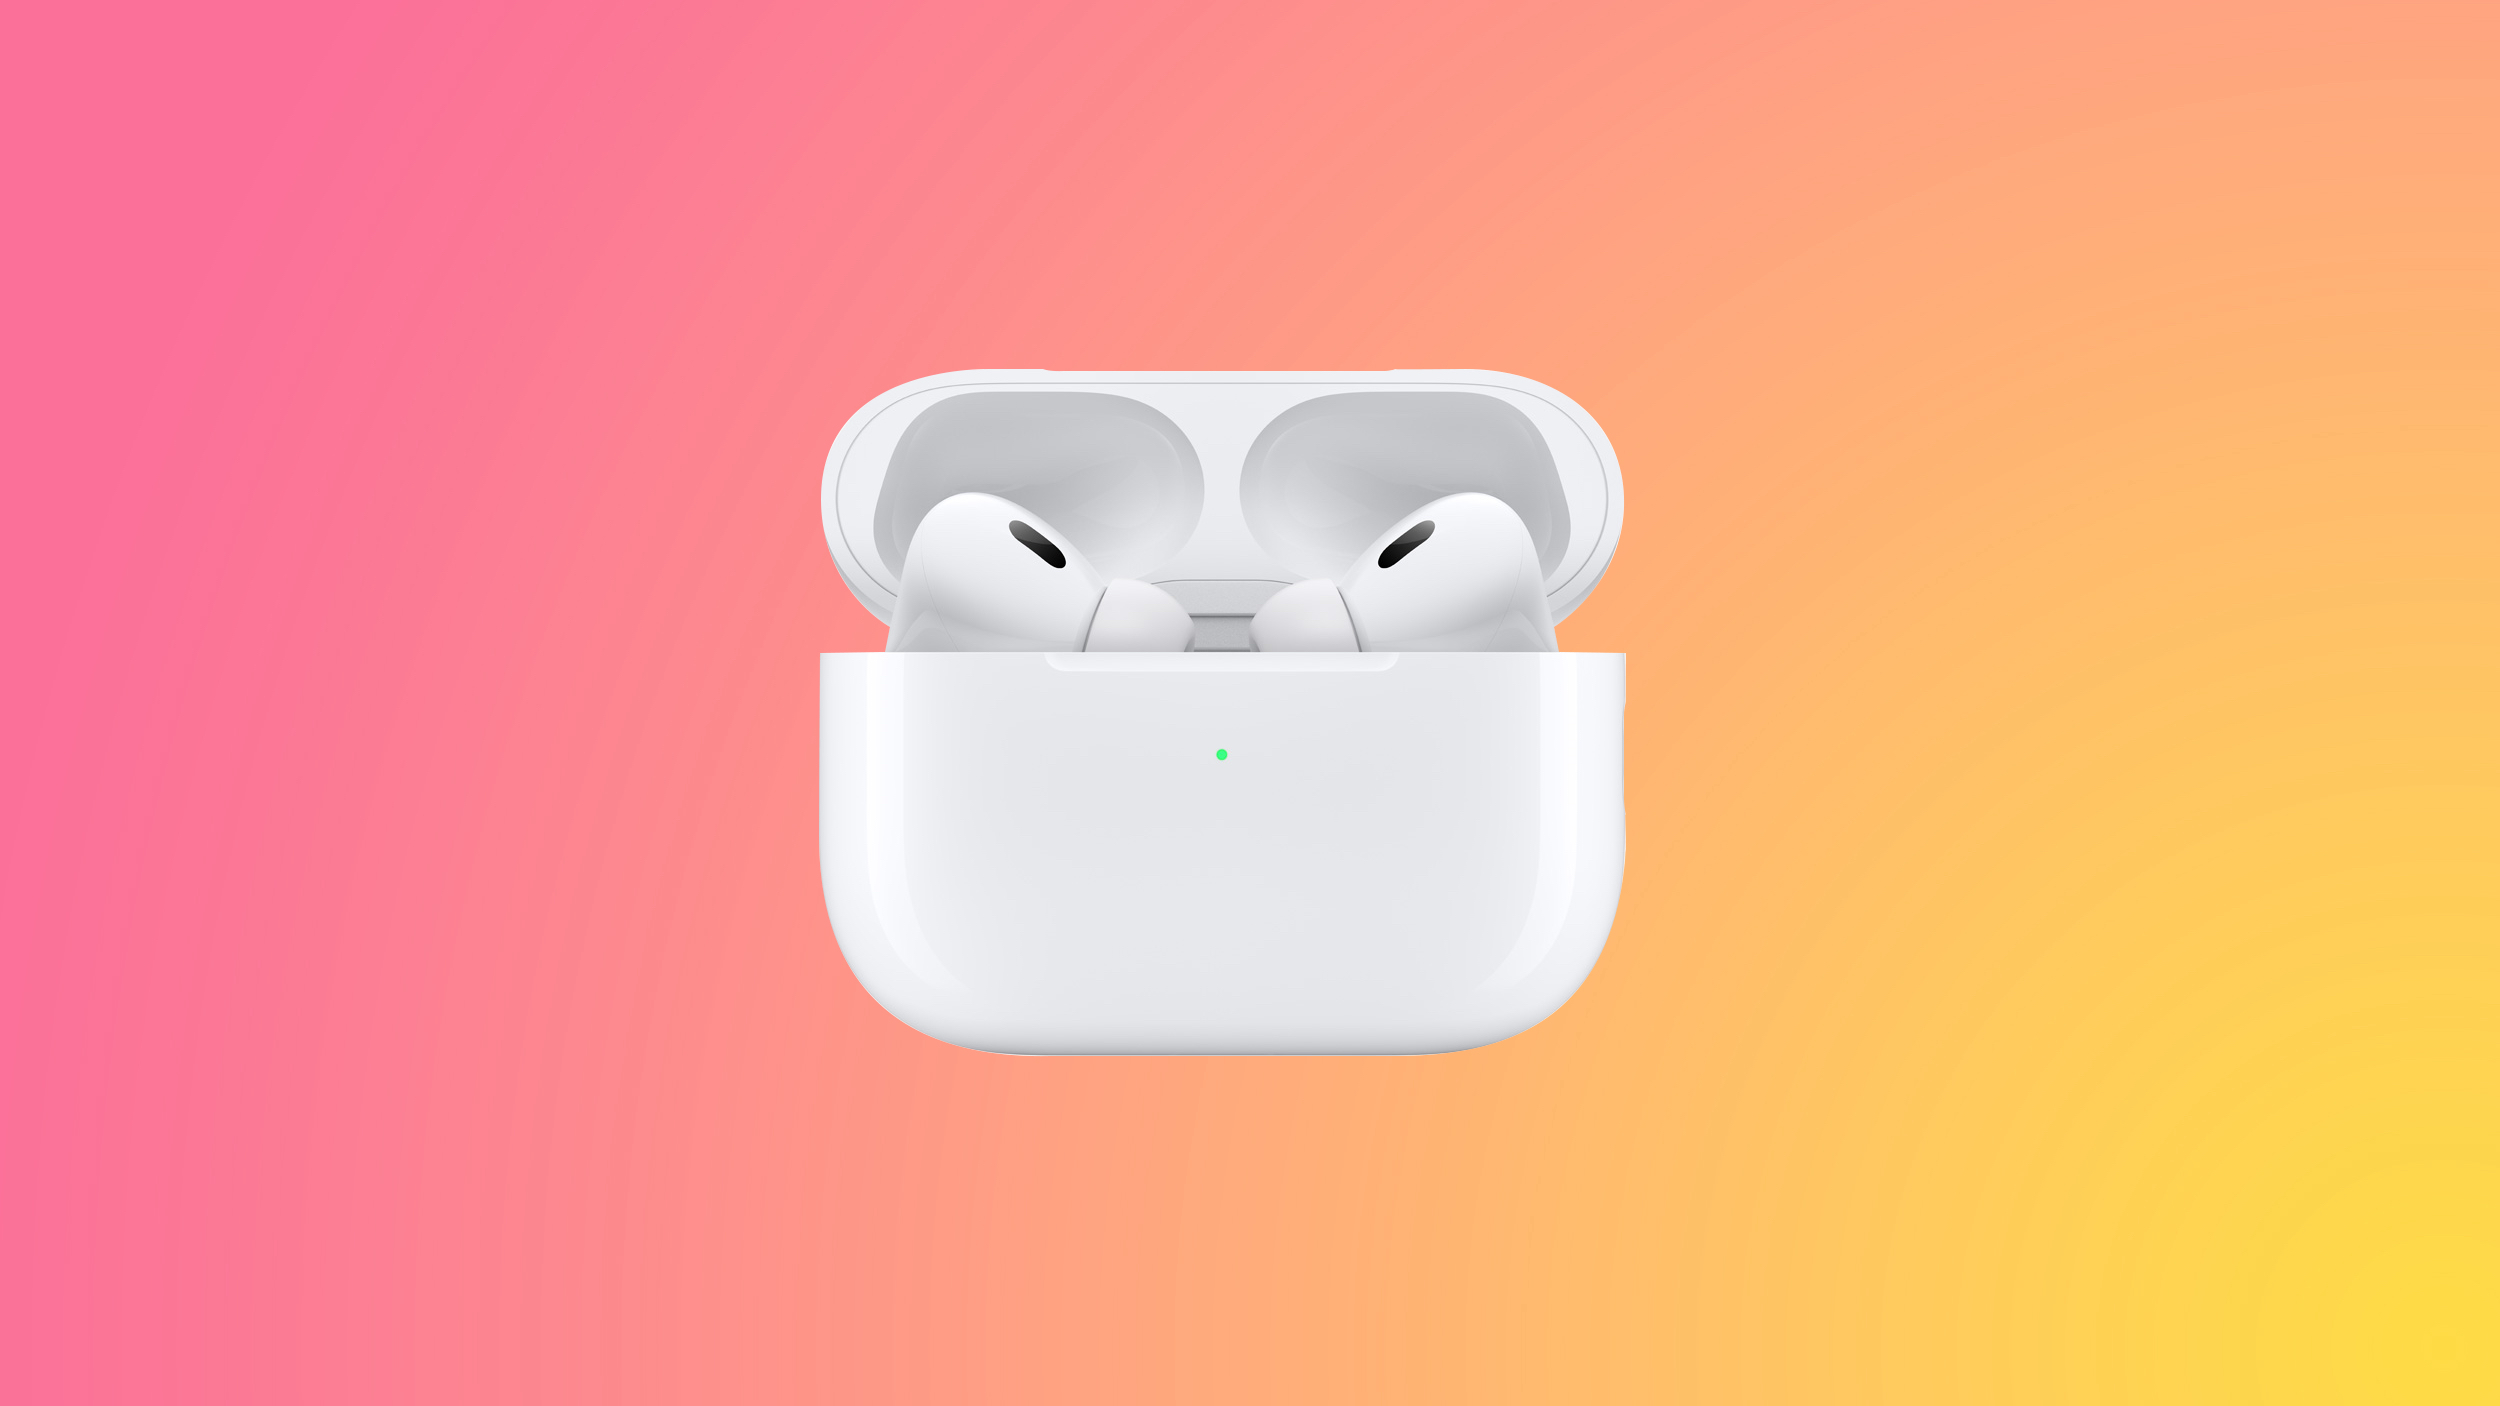 airpods pro 2 pink